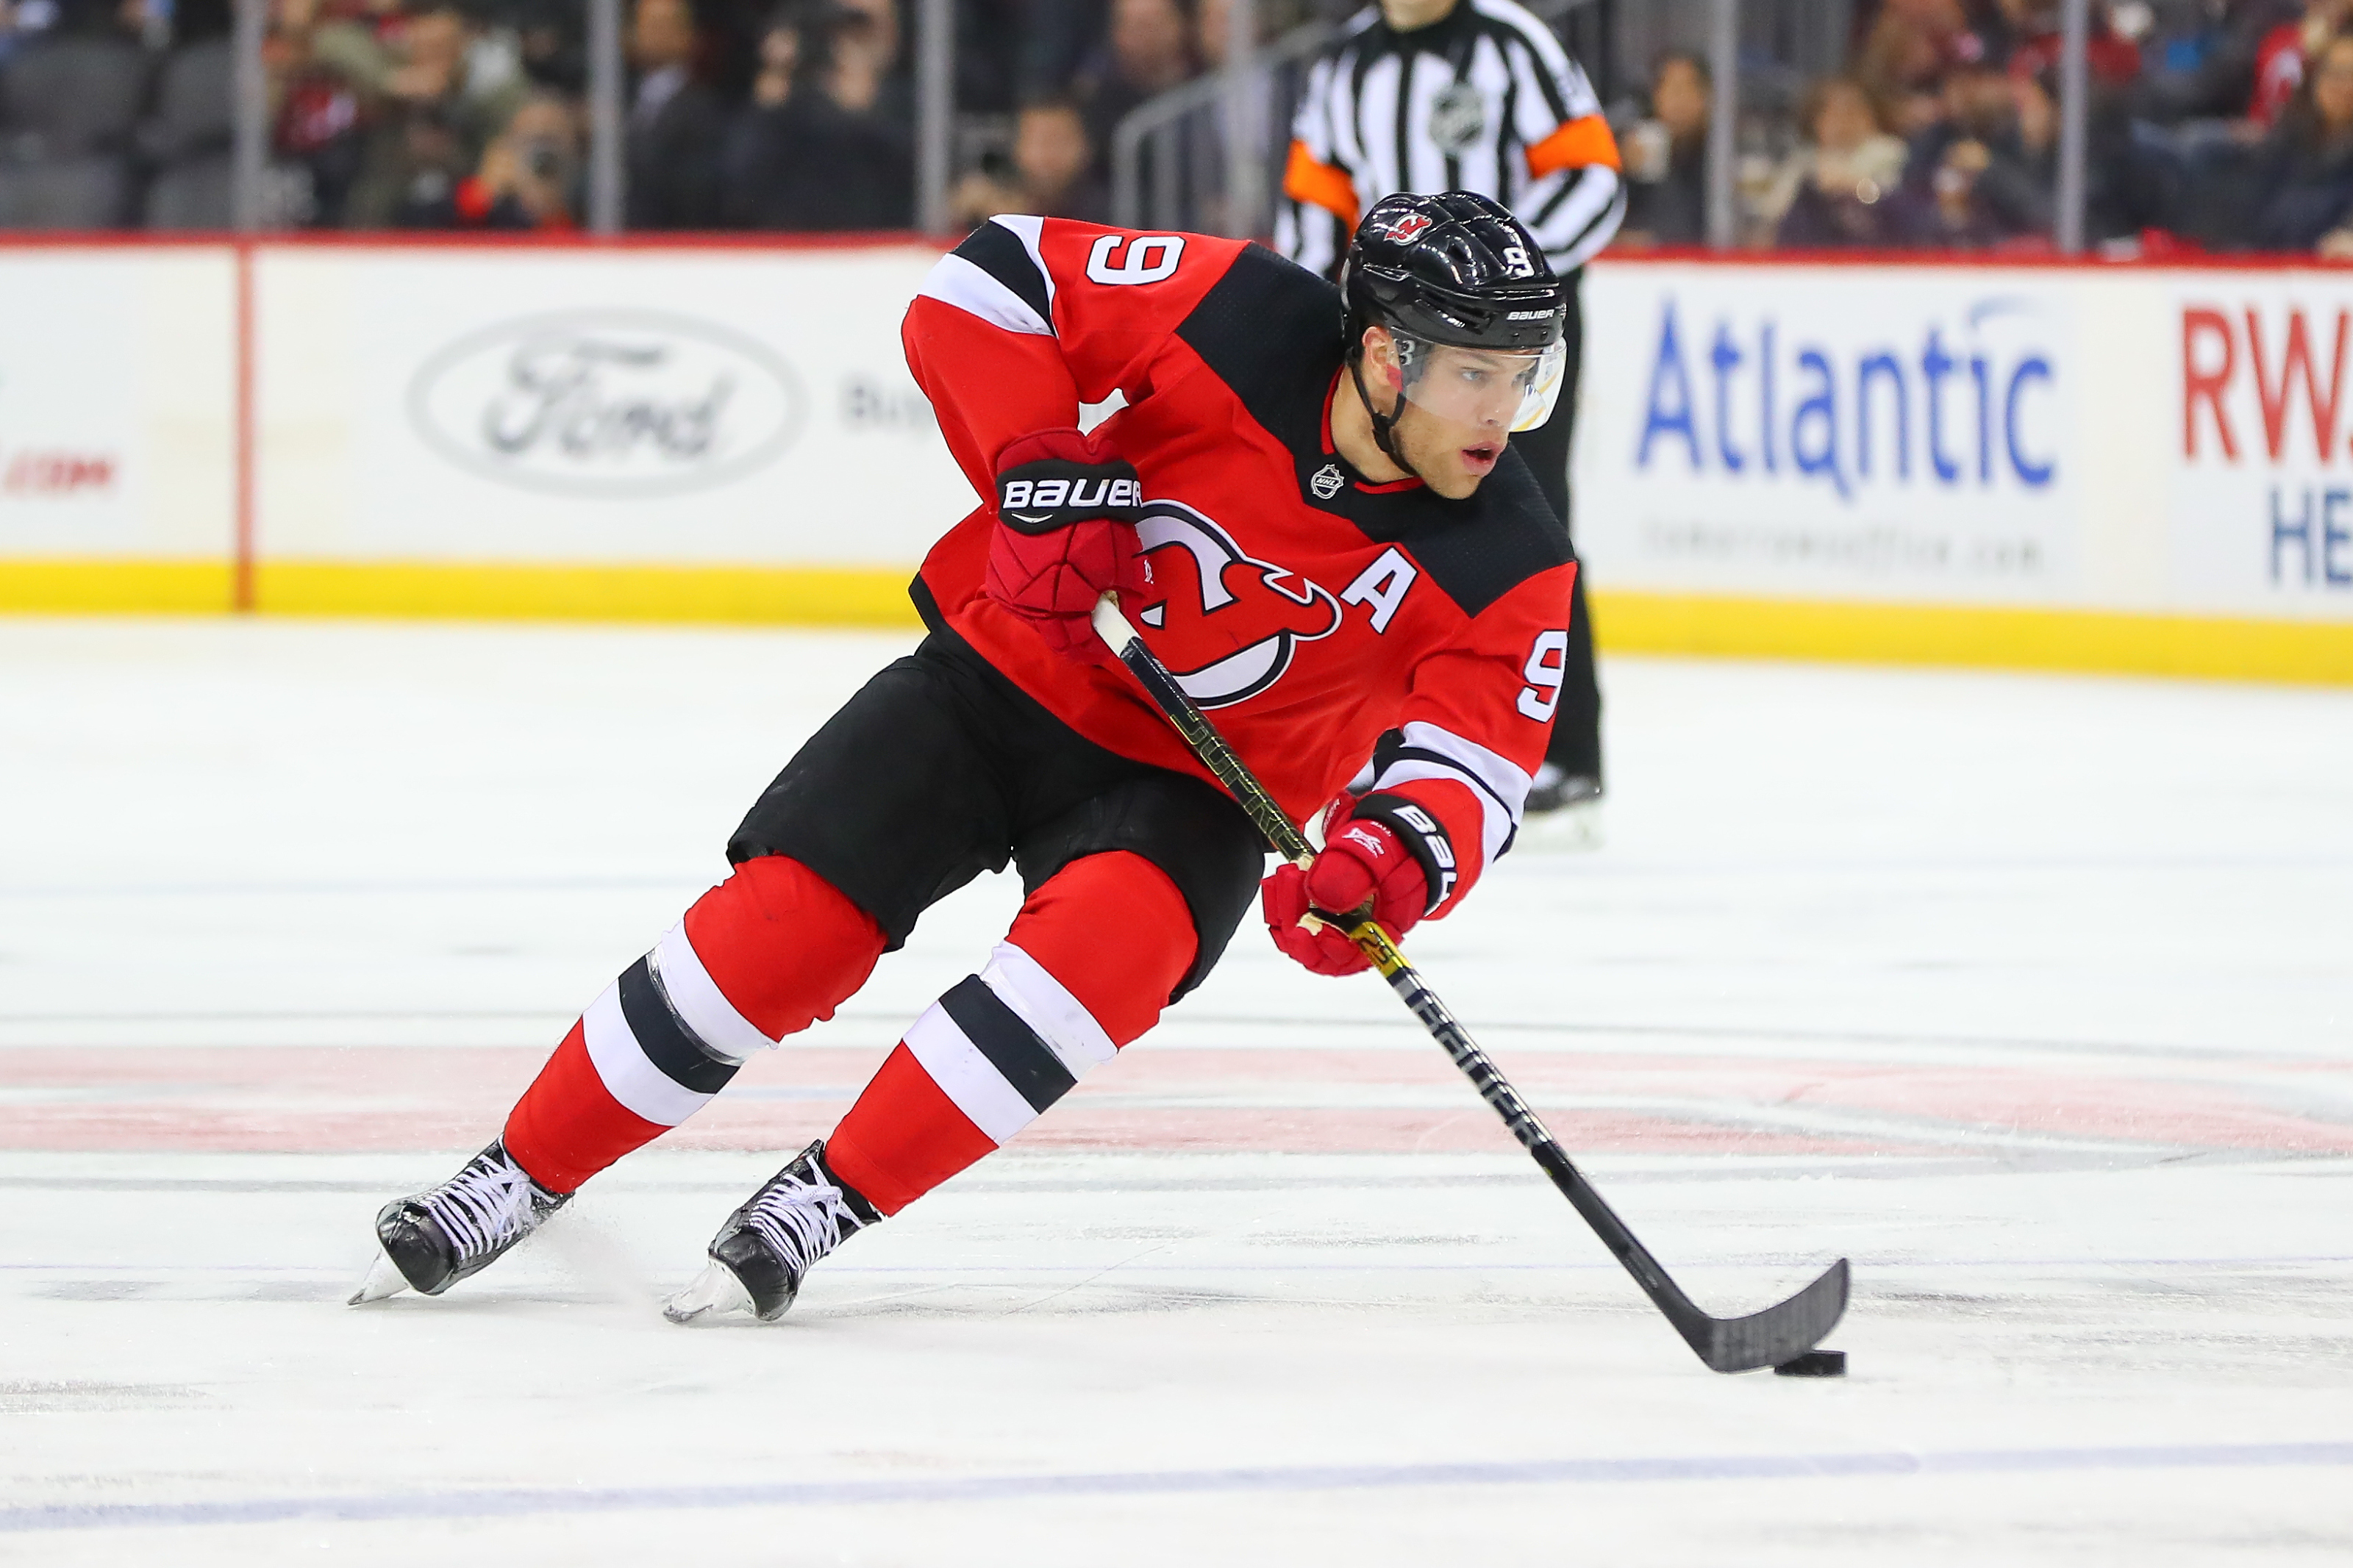 New Jersey Devils: Taylor Hall is finally traded away for a good haul